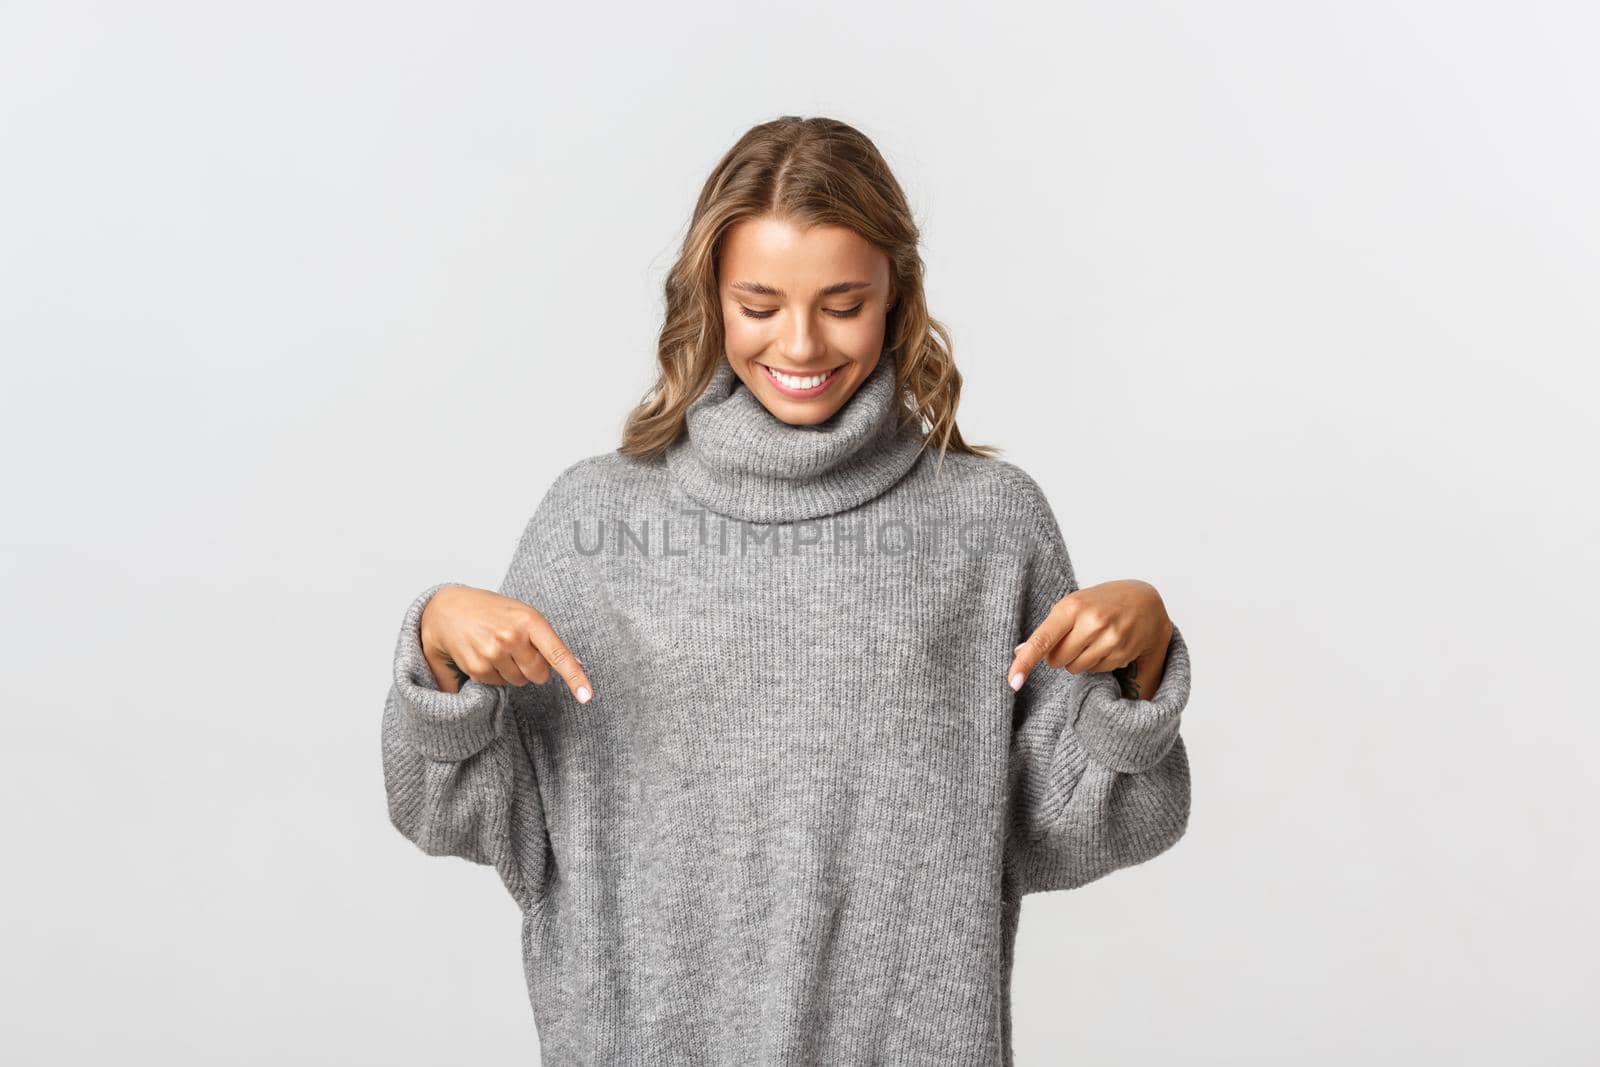 Image of lovely blond woman in grey sweater, smiling as pointing and looking down at logo advertising, standing against white background.